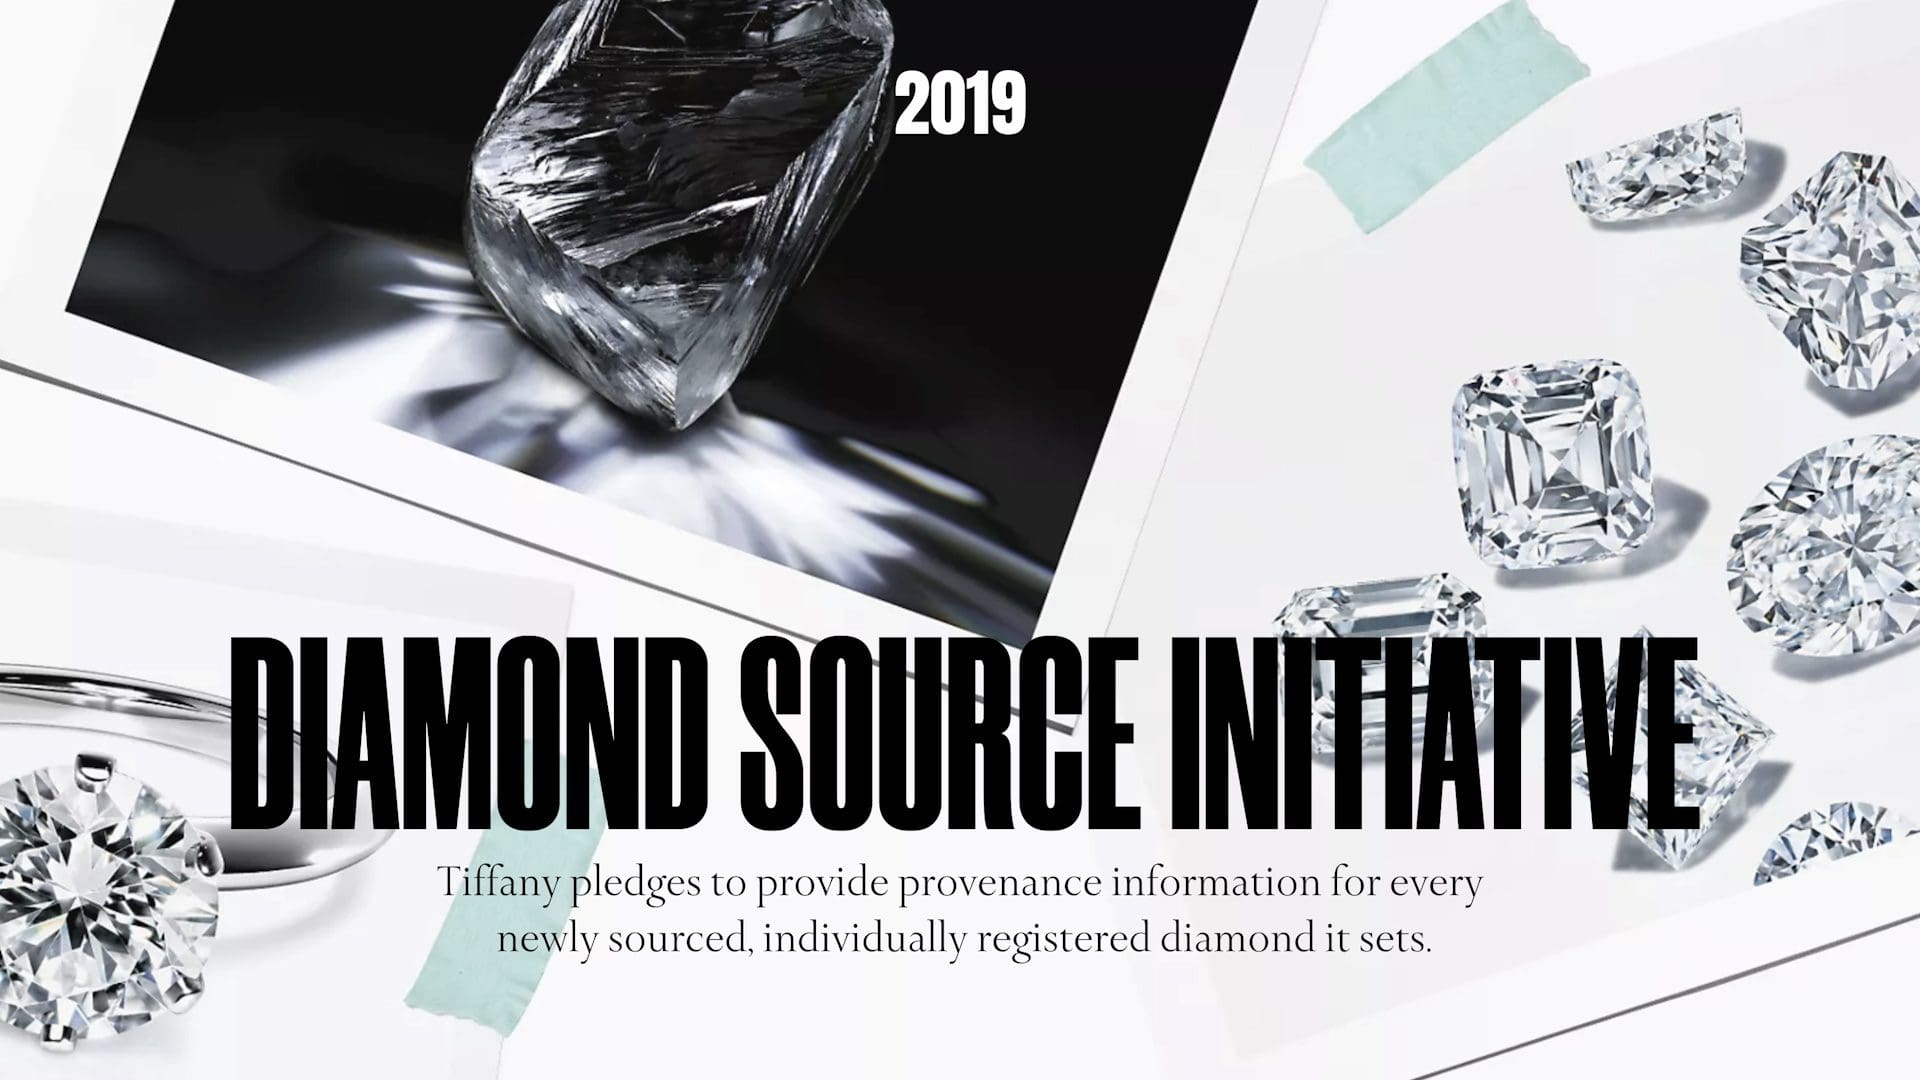 Promotional graphic for Tiffany & Co.'s 2019 Diamond Source Initiative, showcasing various cut diamonds and the commitment to providing provenance information for each newly sourced, individually registered diamond.